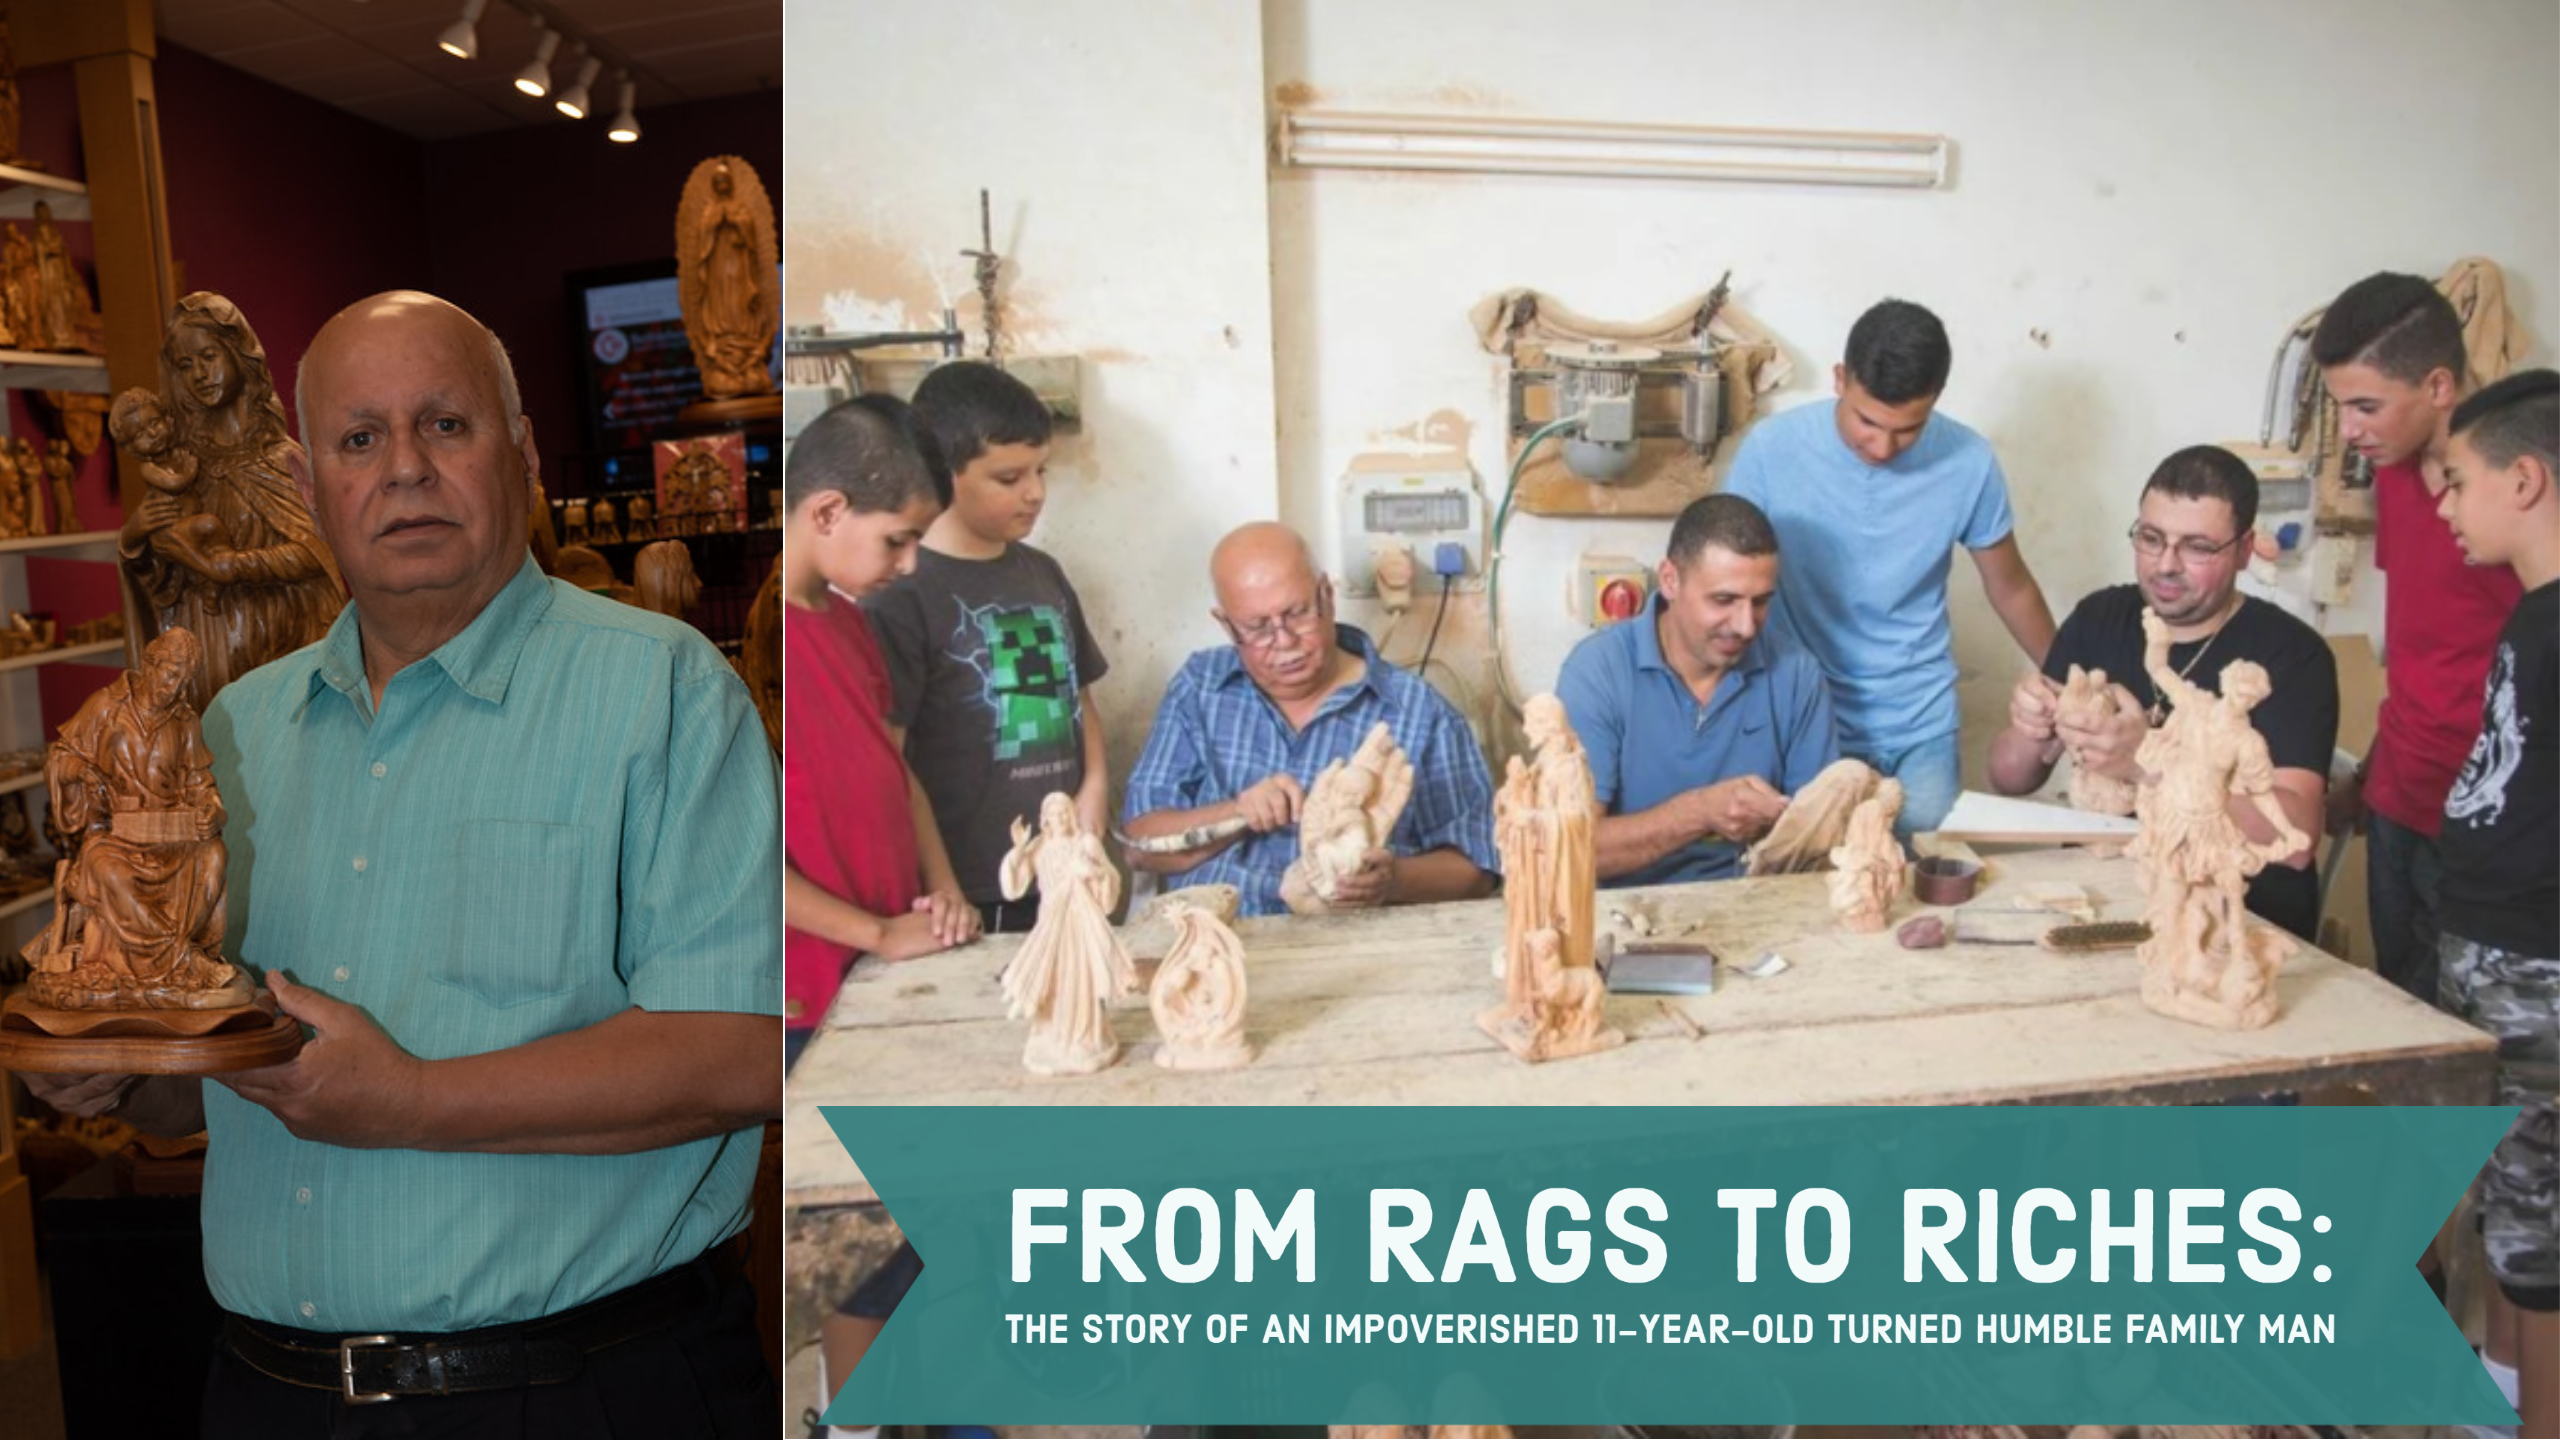 From Rags to Riches: The Story of an Impoverished 11-Year-Old Turned Humble Family Man